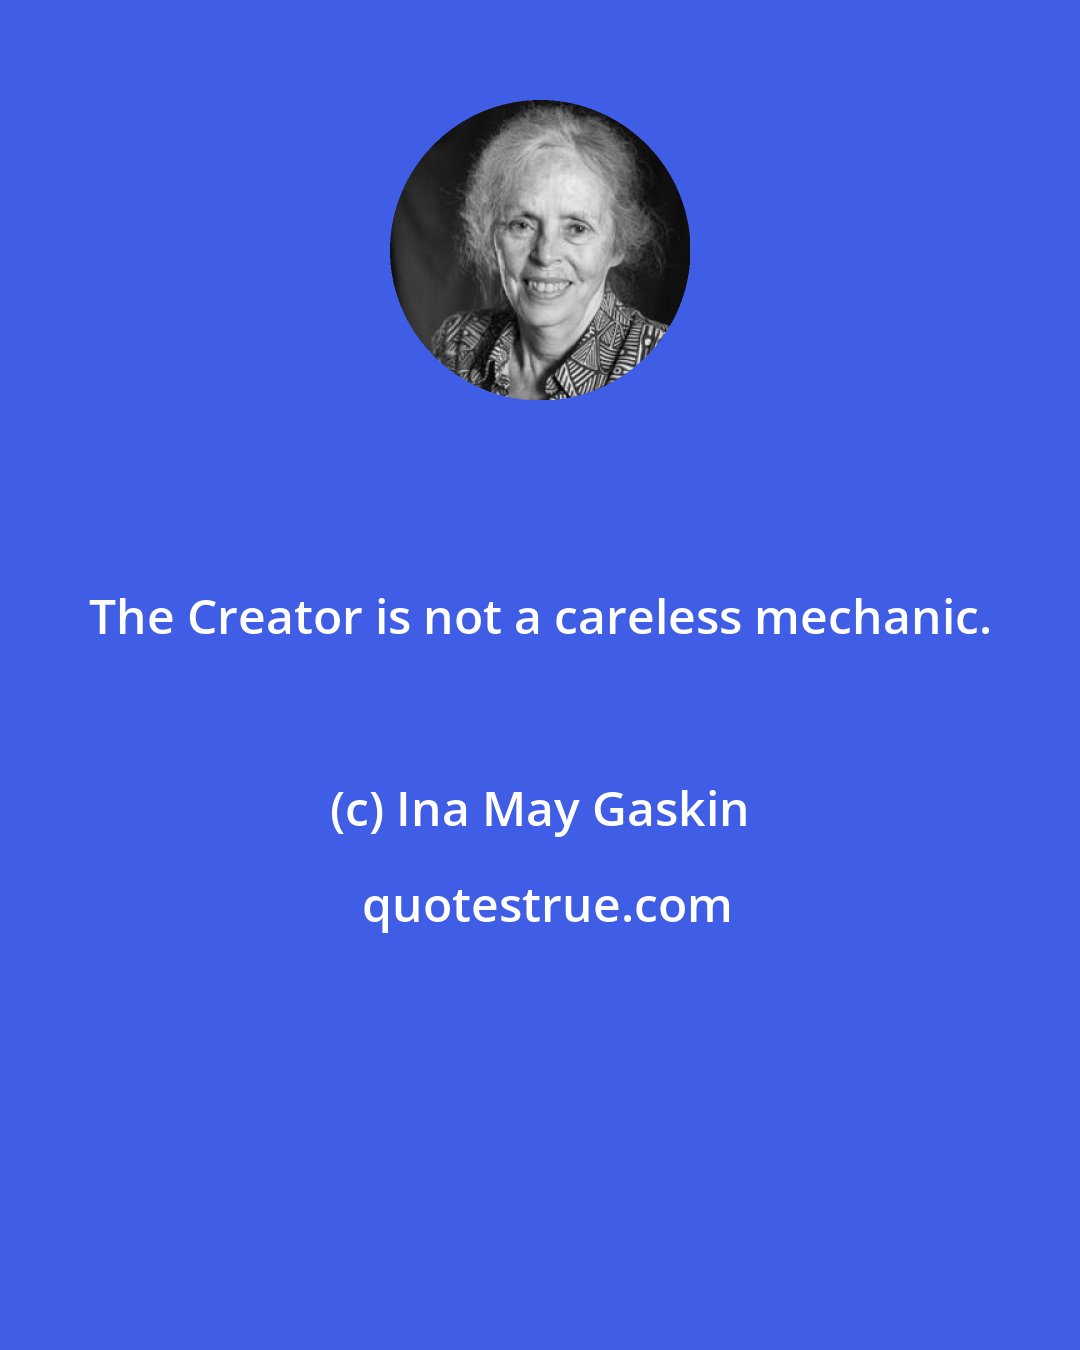 Ina May Gaskin: The Creator is not a careless mechanic.